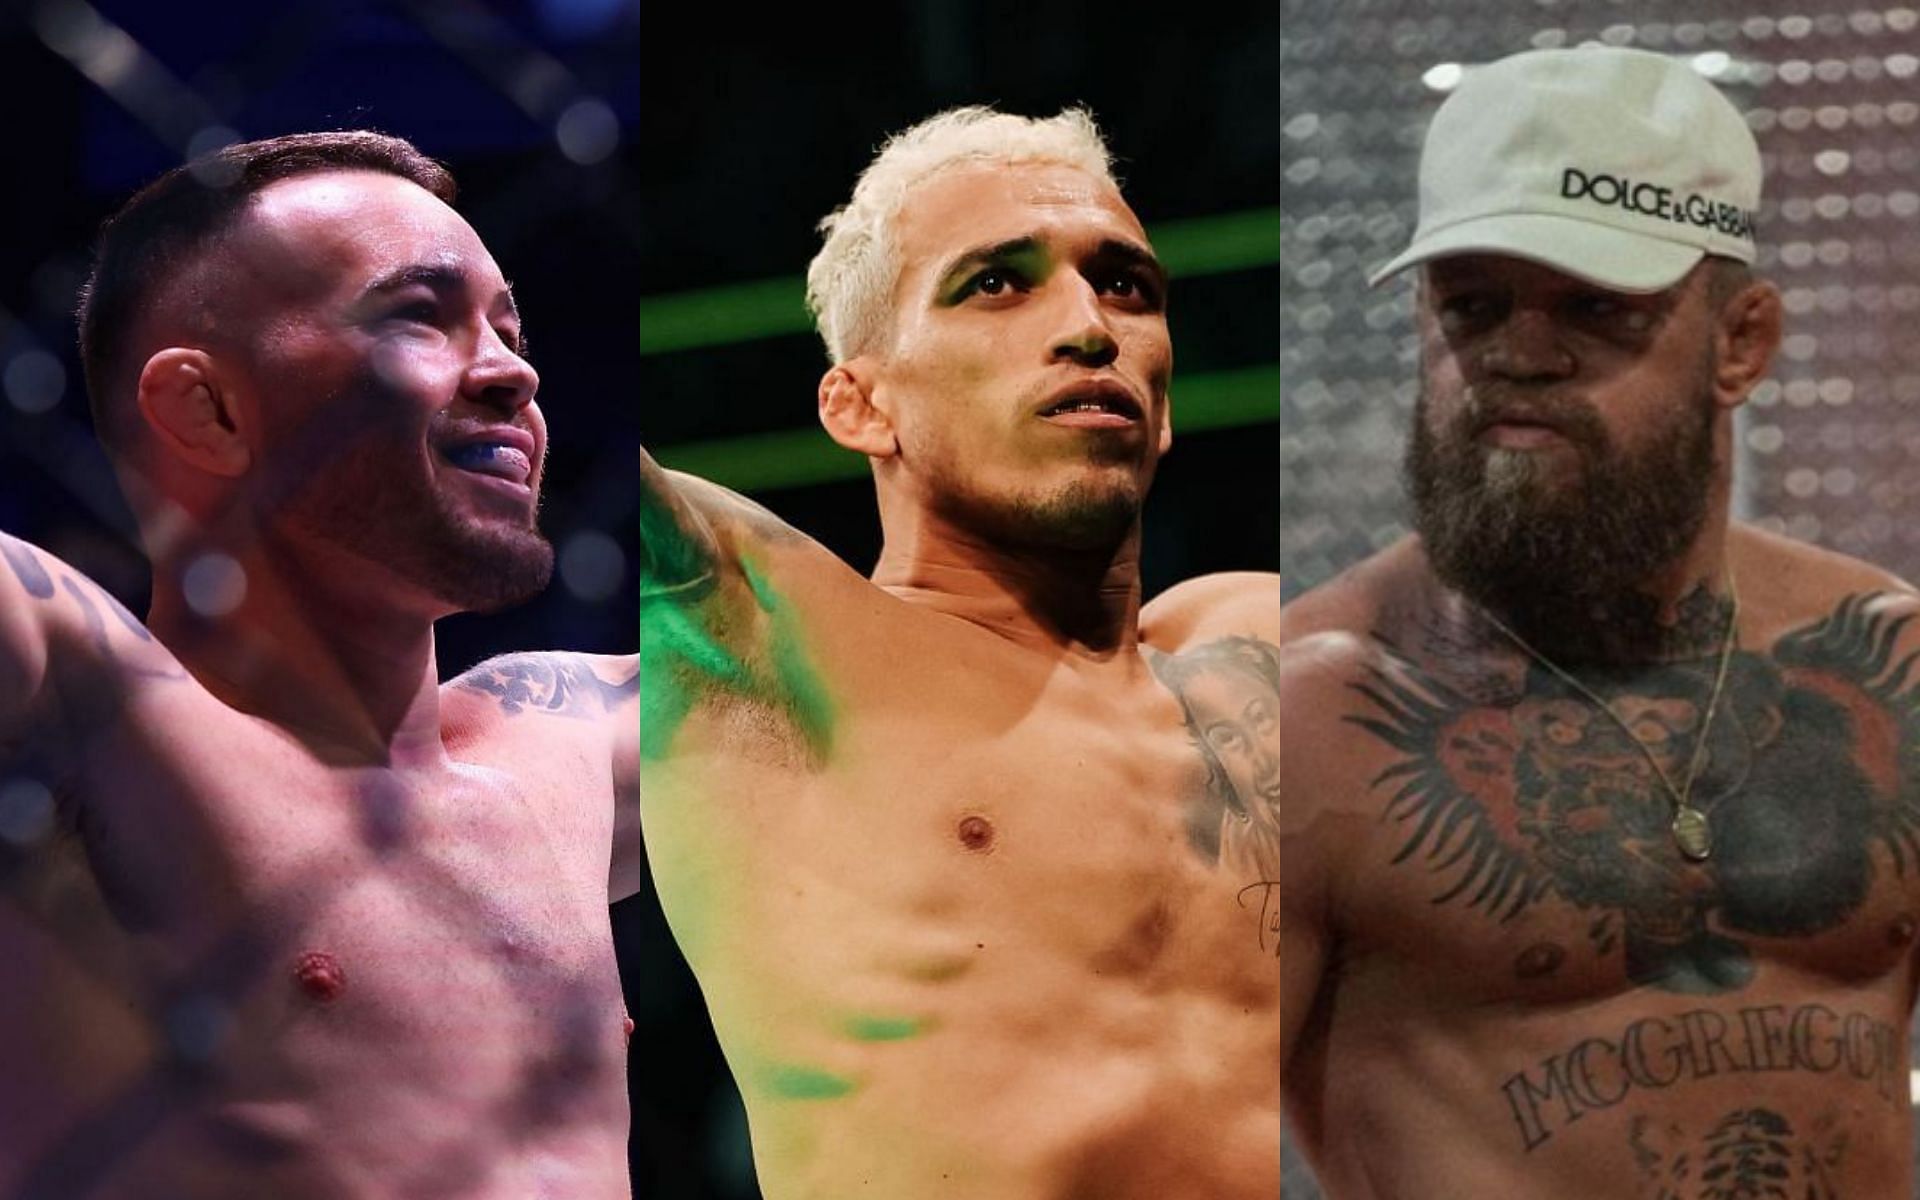 Colby Covington believes Conor McGregor deserves a shot at Charles Oliveira and the UFC lightweight title